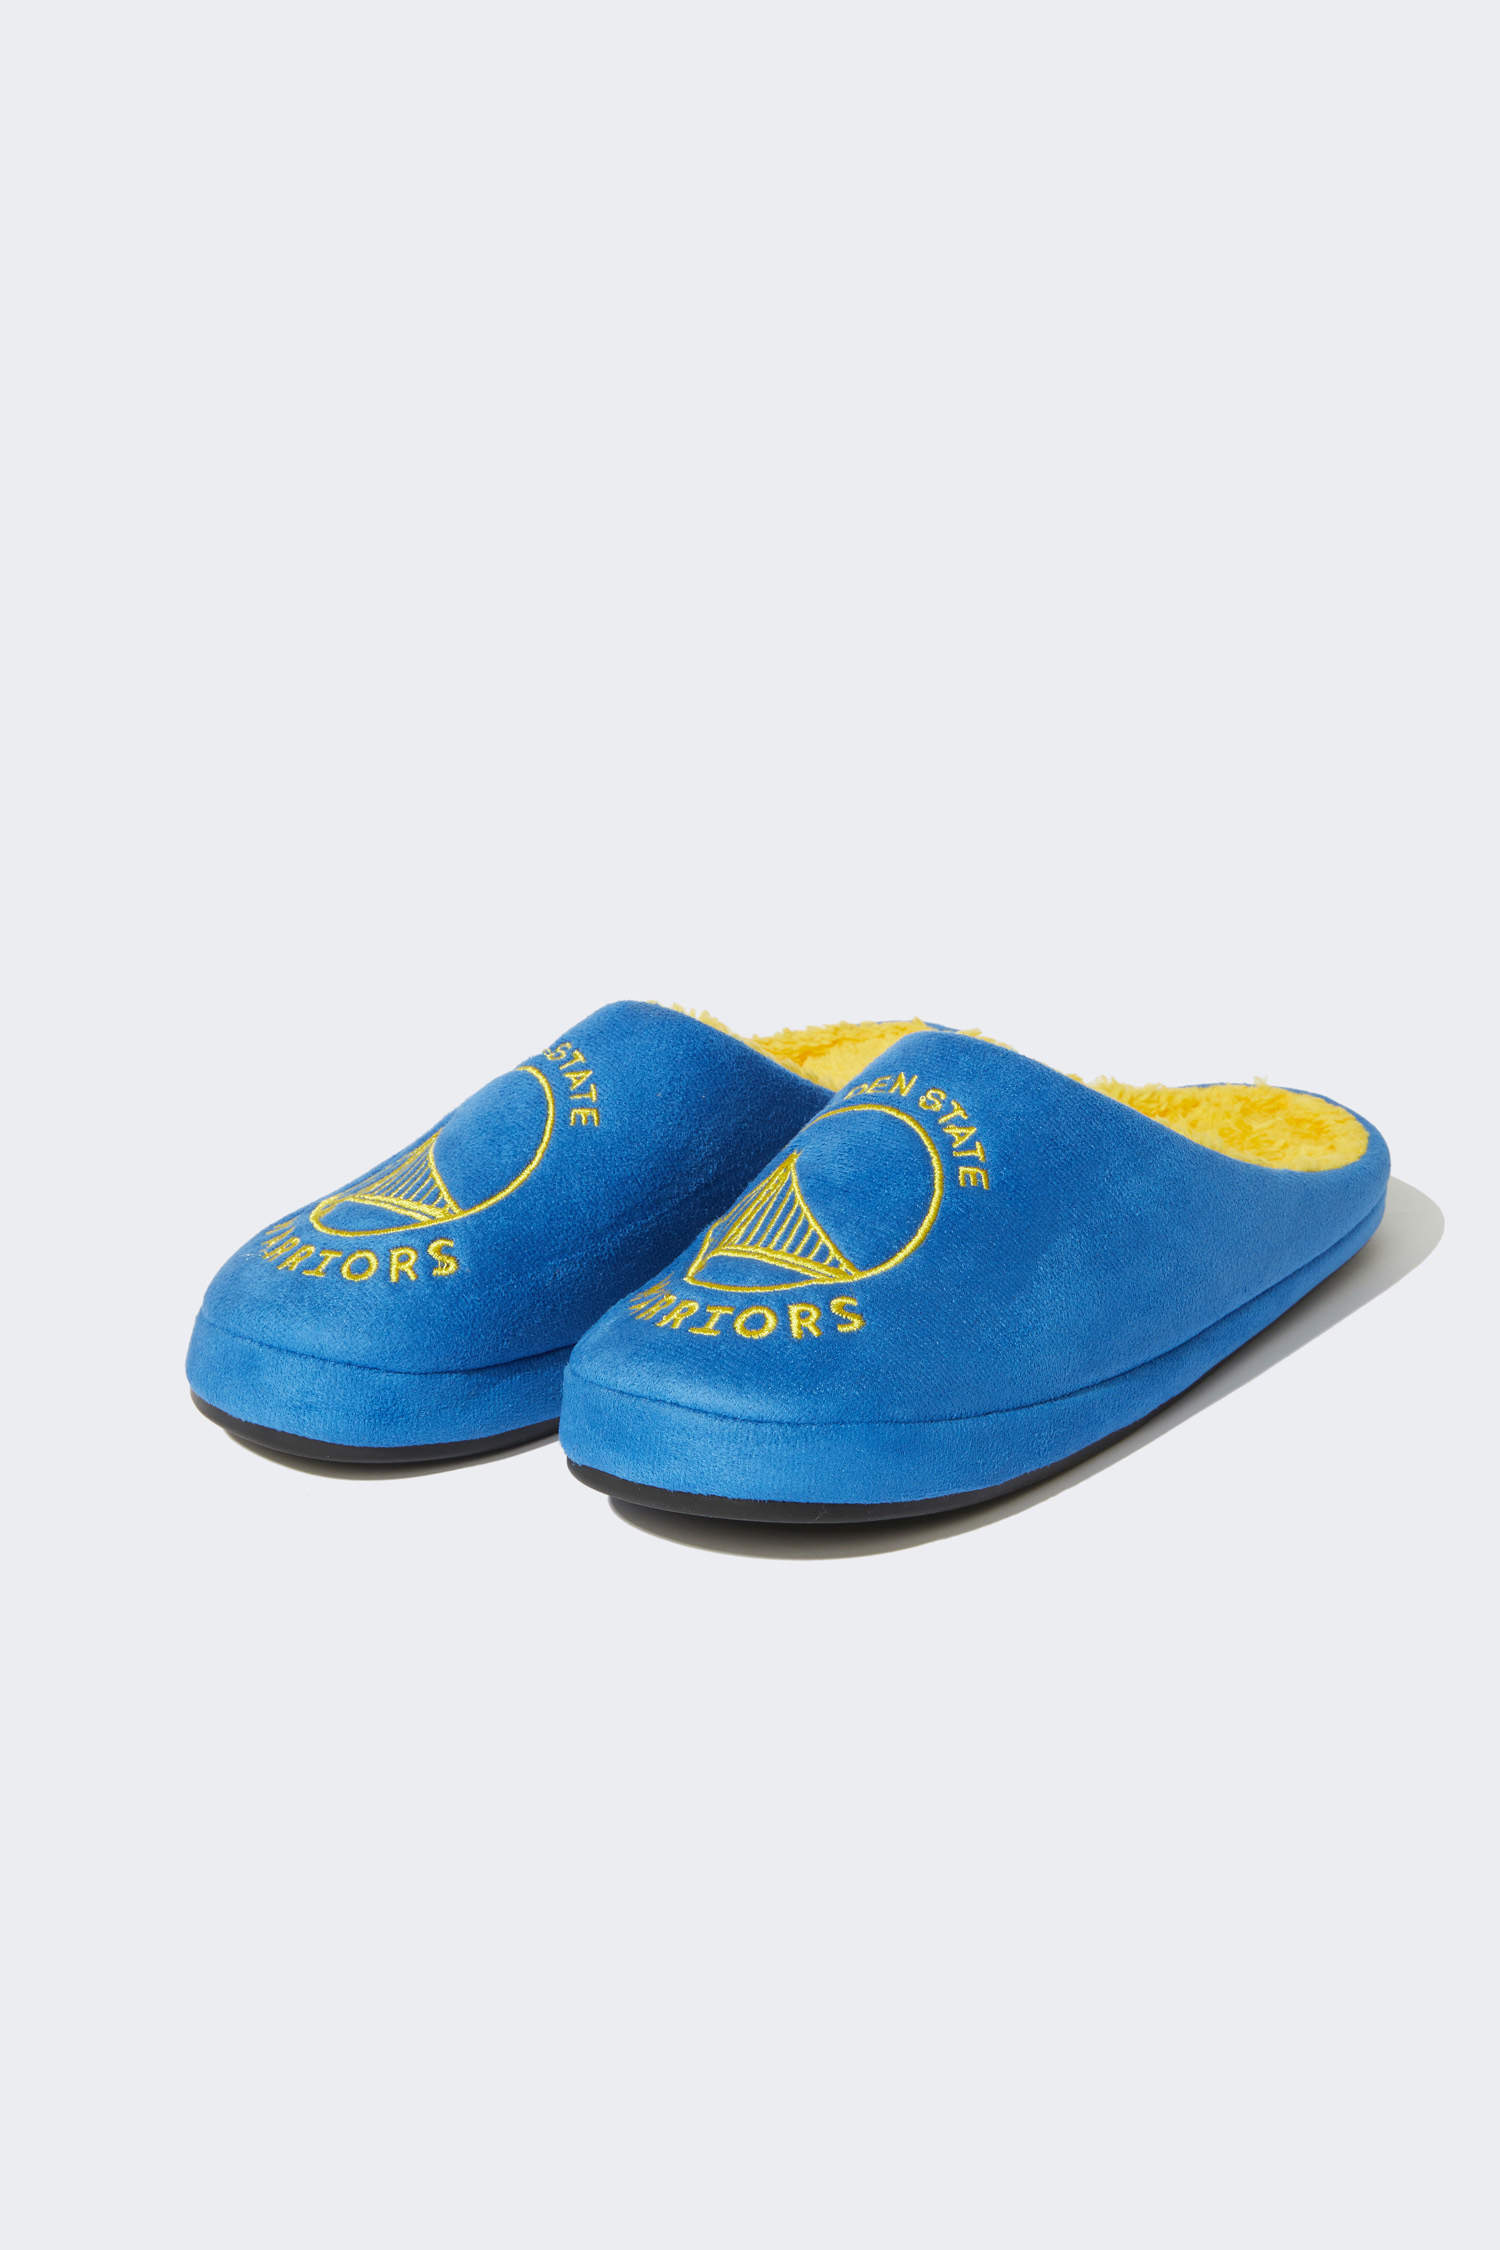 Golden State Warriors NBA Slippers for sale